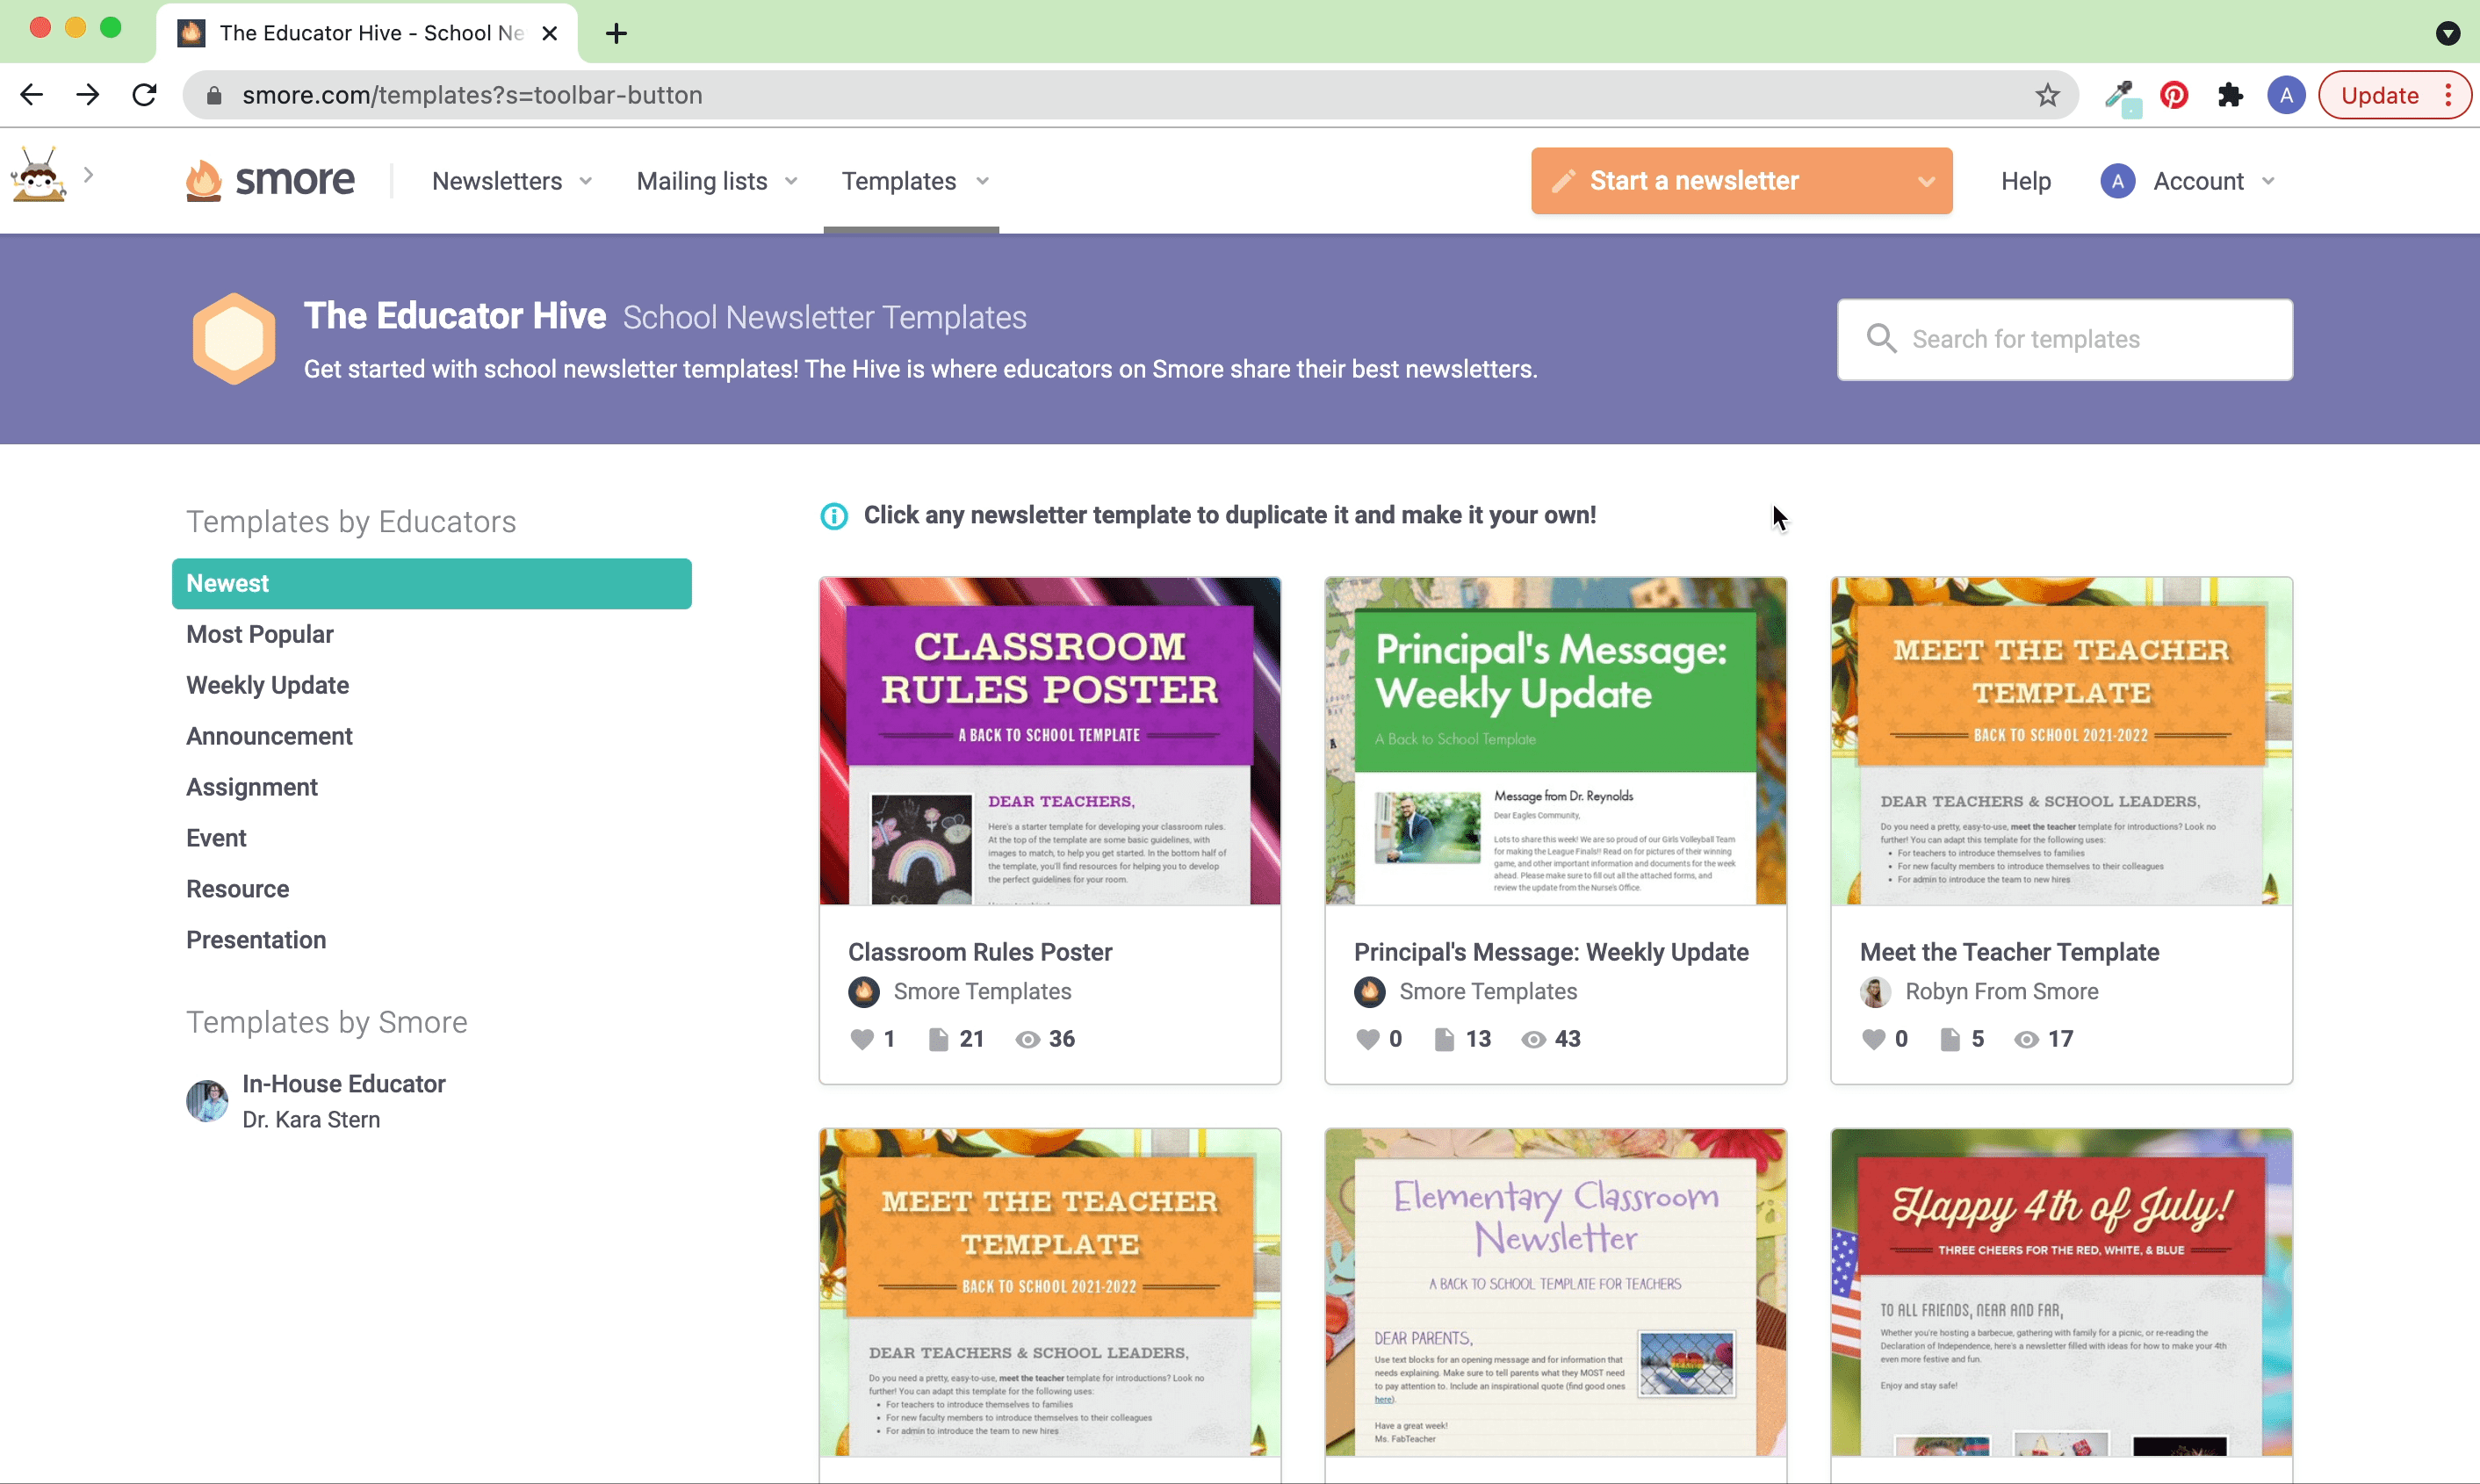 Smore’s School Newsletter Template Center Gets a Makeover